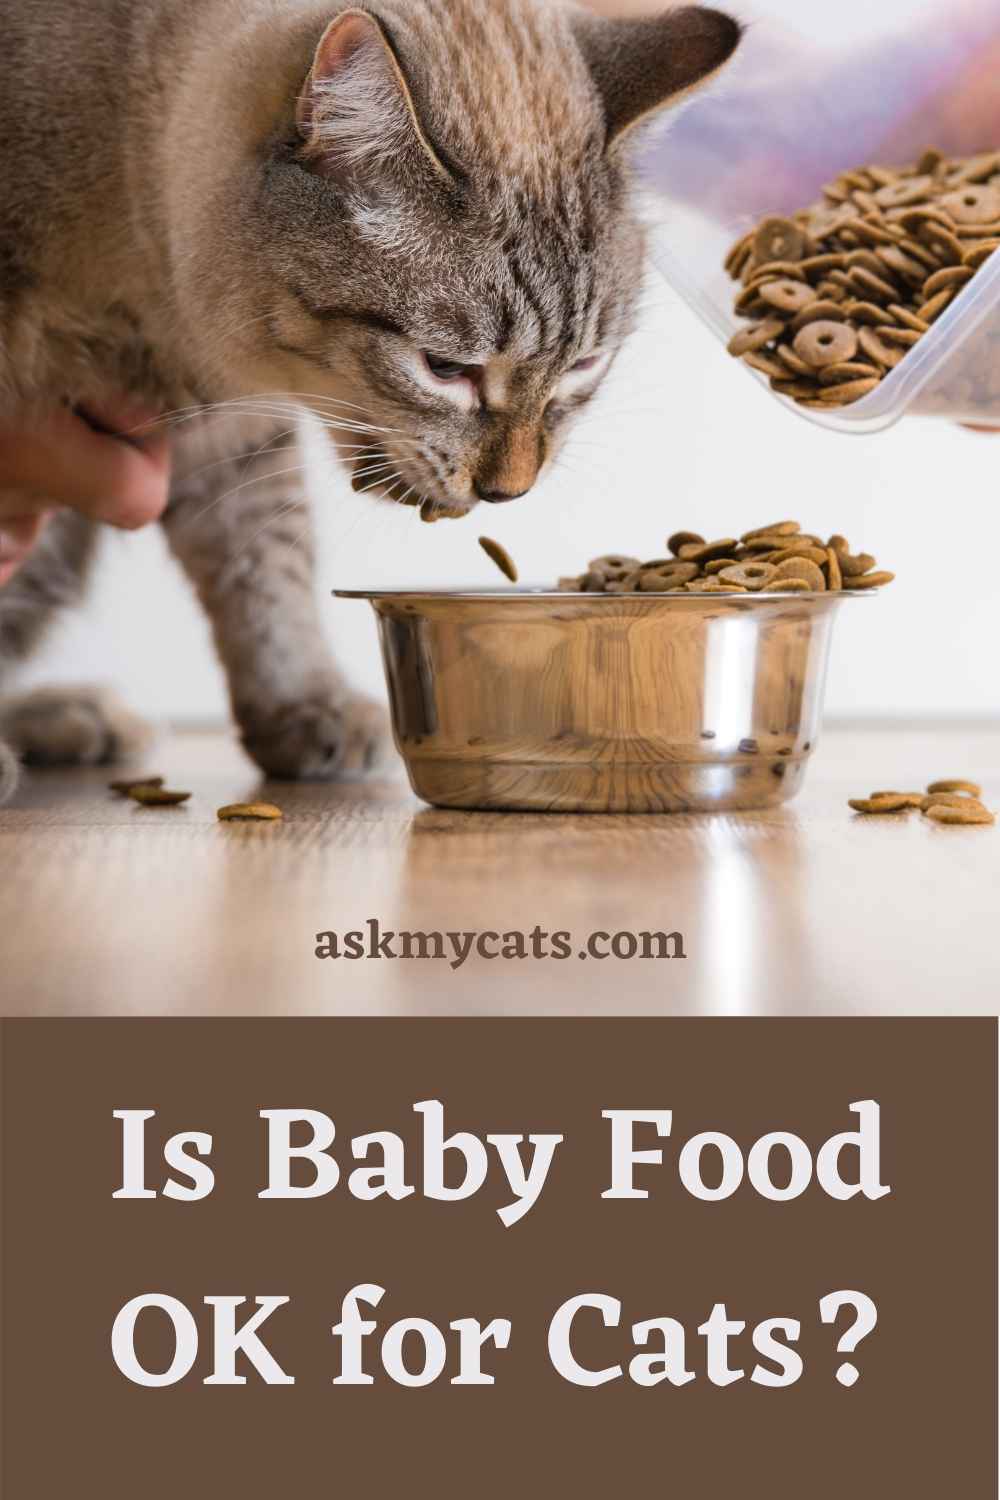 Can Cats Eat Baby Food? Are There Any Side